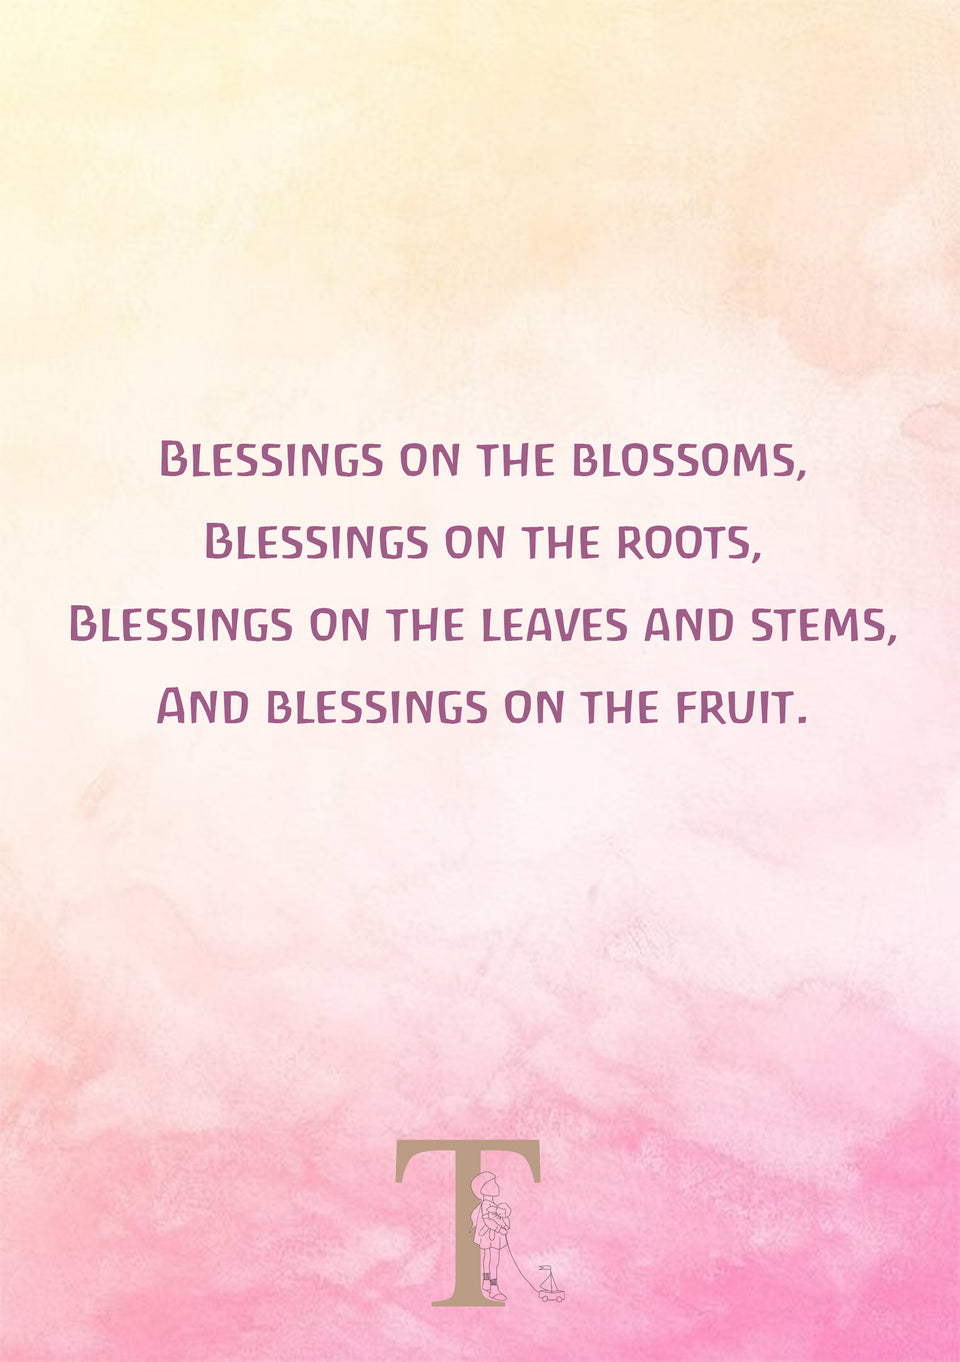 FREE DOWNLOAD ~ BLESSINGS ON THE BLOSSOMS